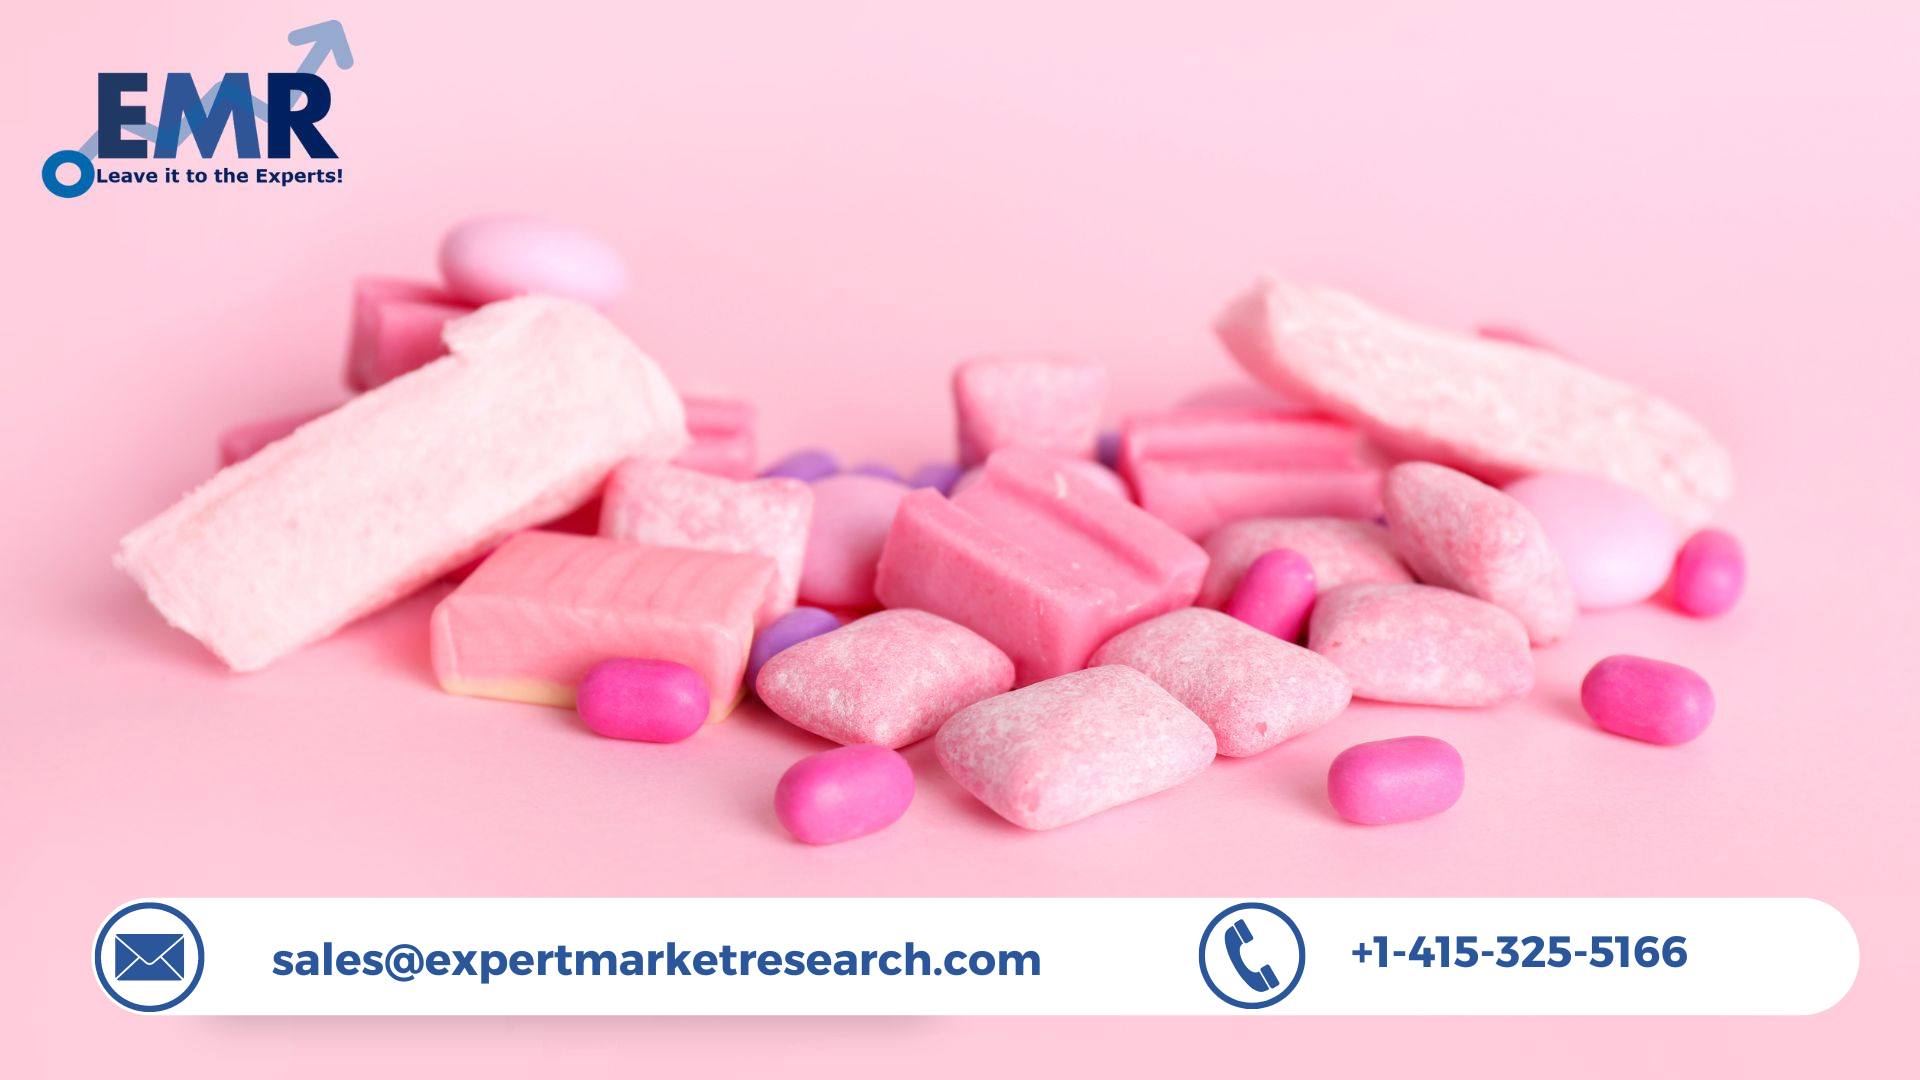 Global Chewing Gum Market To Grow At A CAGR Of 4.1% By 2028 | EMR Inc.